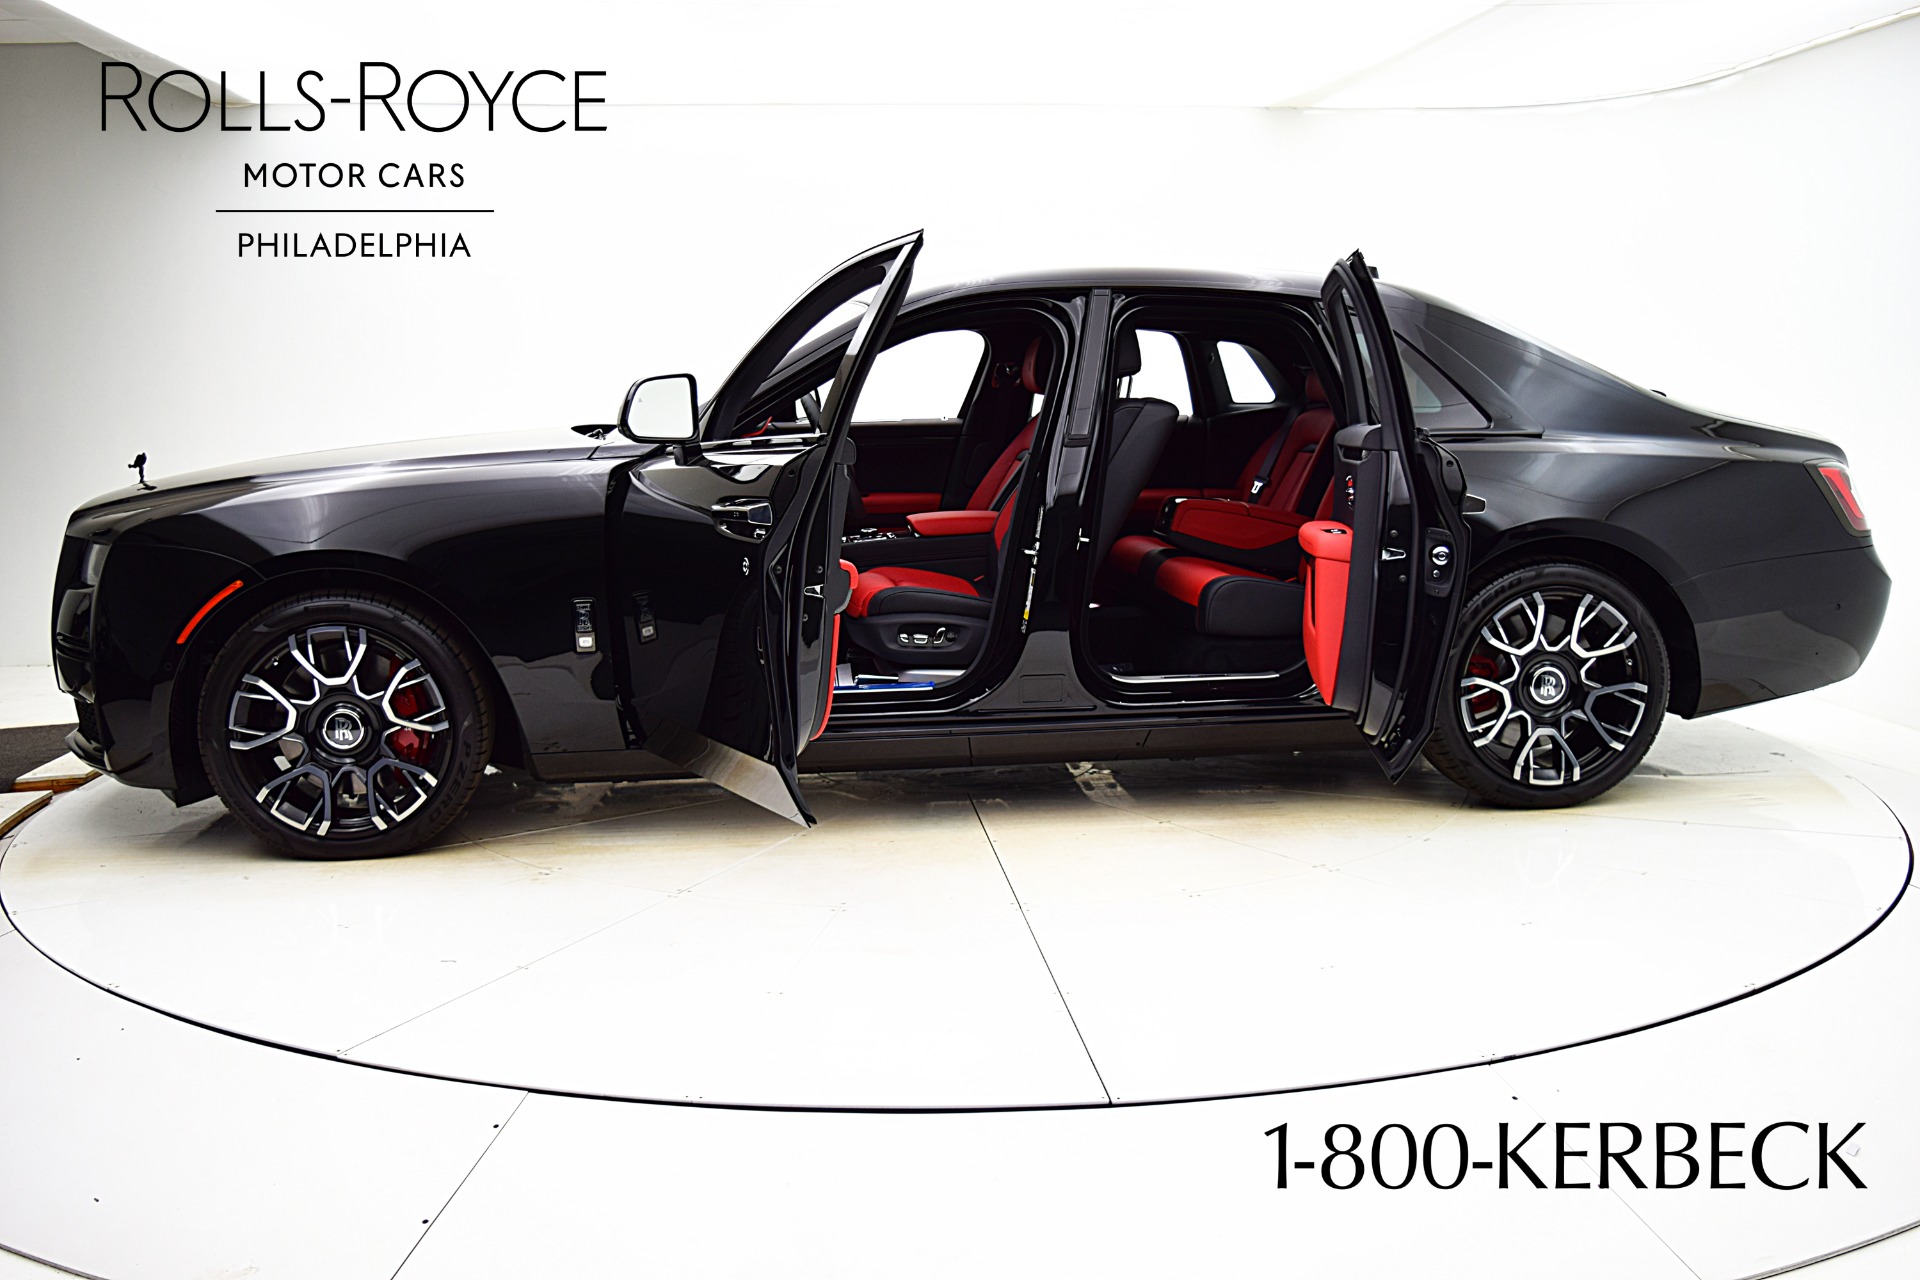 New 2023 RollsRoyce Ghost For Sale 386800  FC Kerbeck Stock 23R127